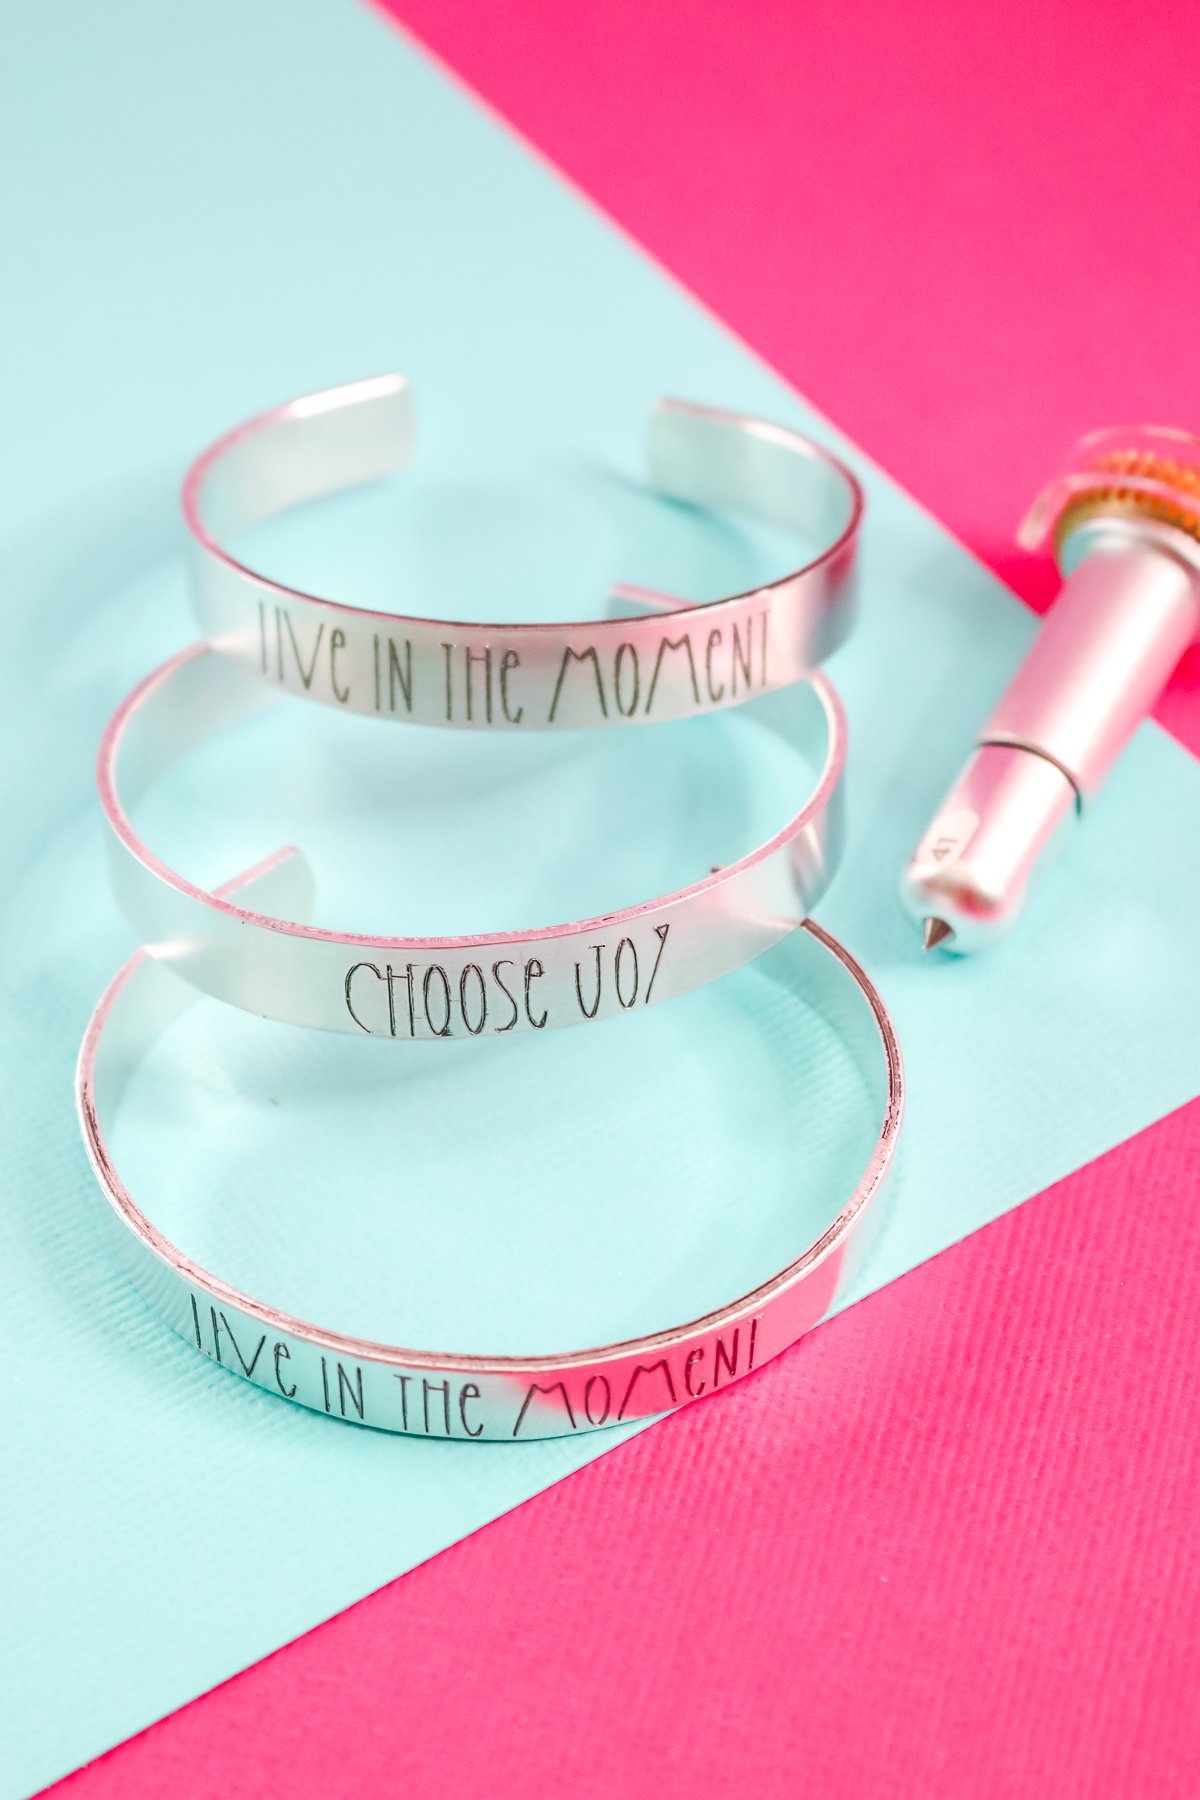 Here's how to engrave with your Cricut maker! Make sure you have